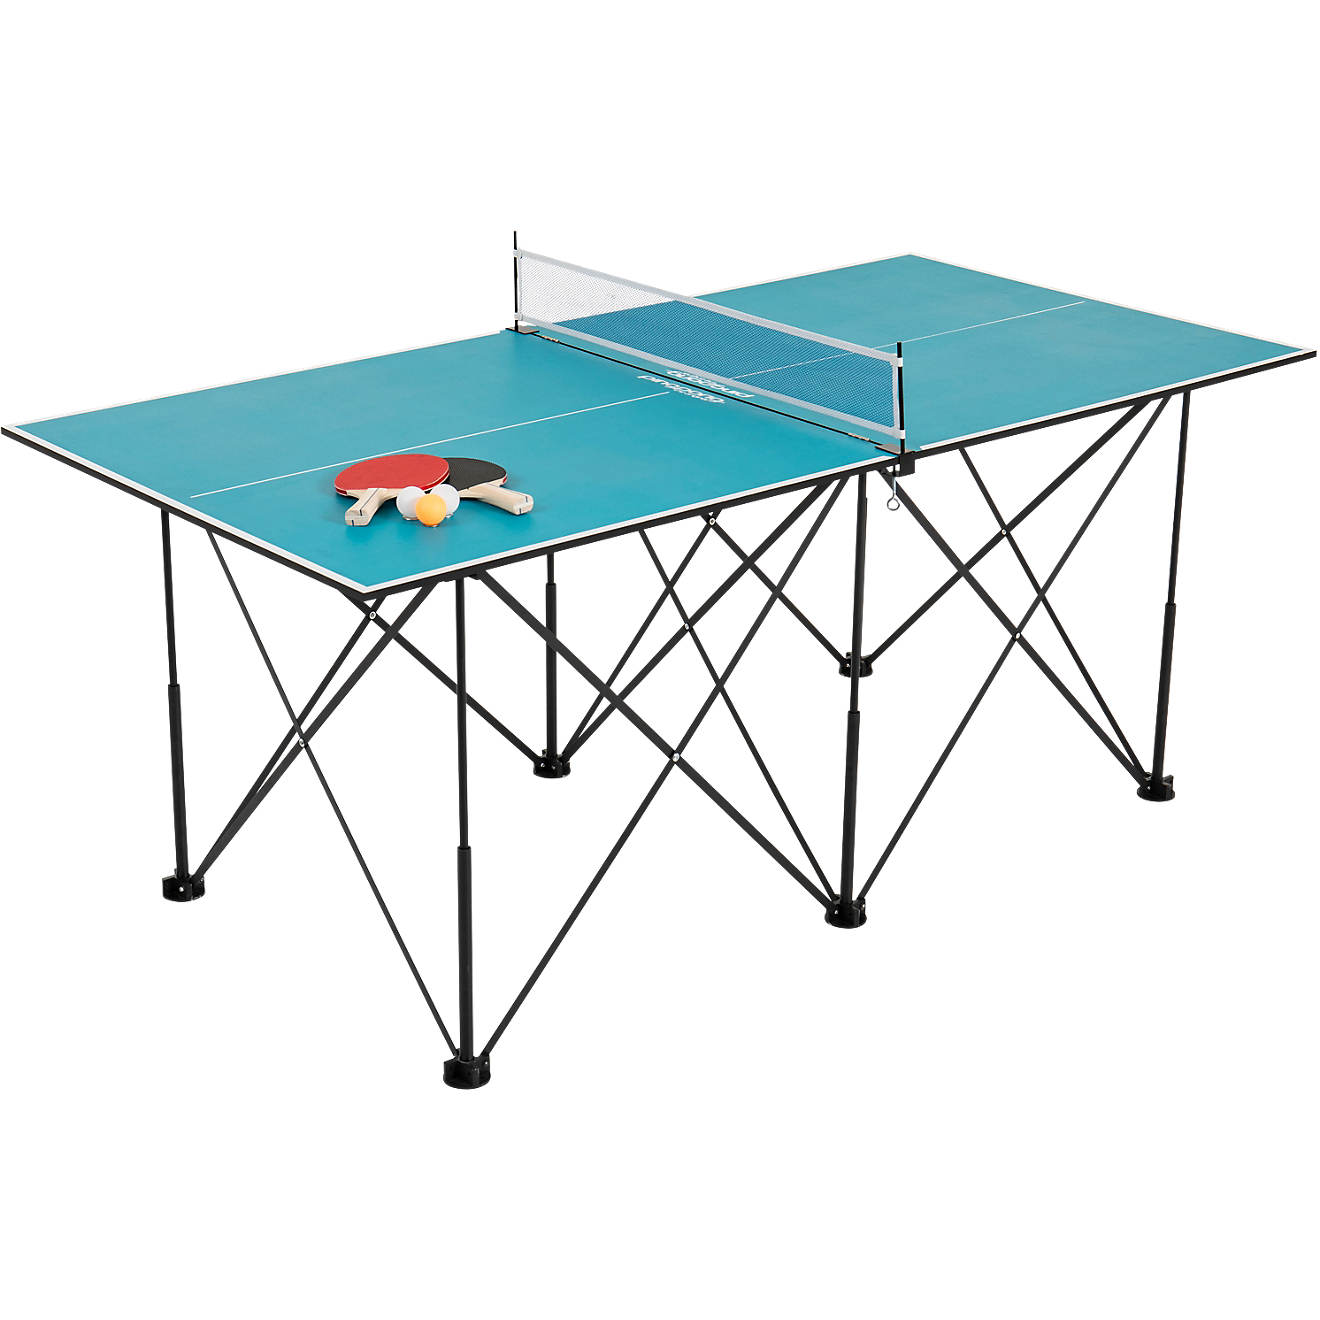 Pong on The Go Portable Table Tennis Playset - Comes with Net, 2  Black/Green Paddles, 3 Balls, and Carry Bag - Indoor/Outdoor Tabletop  Travel Game